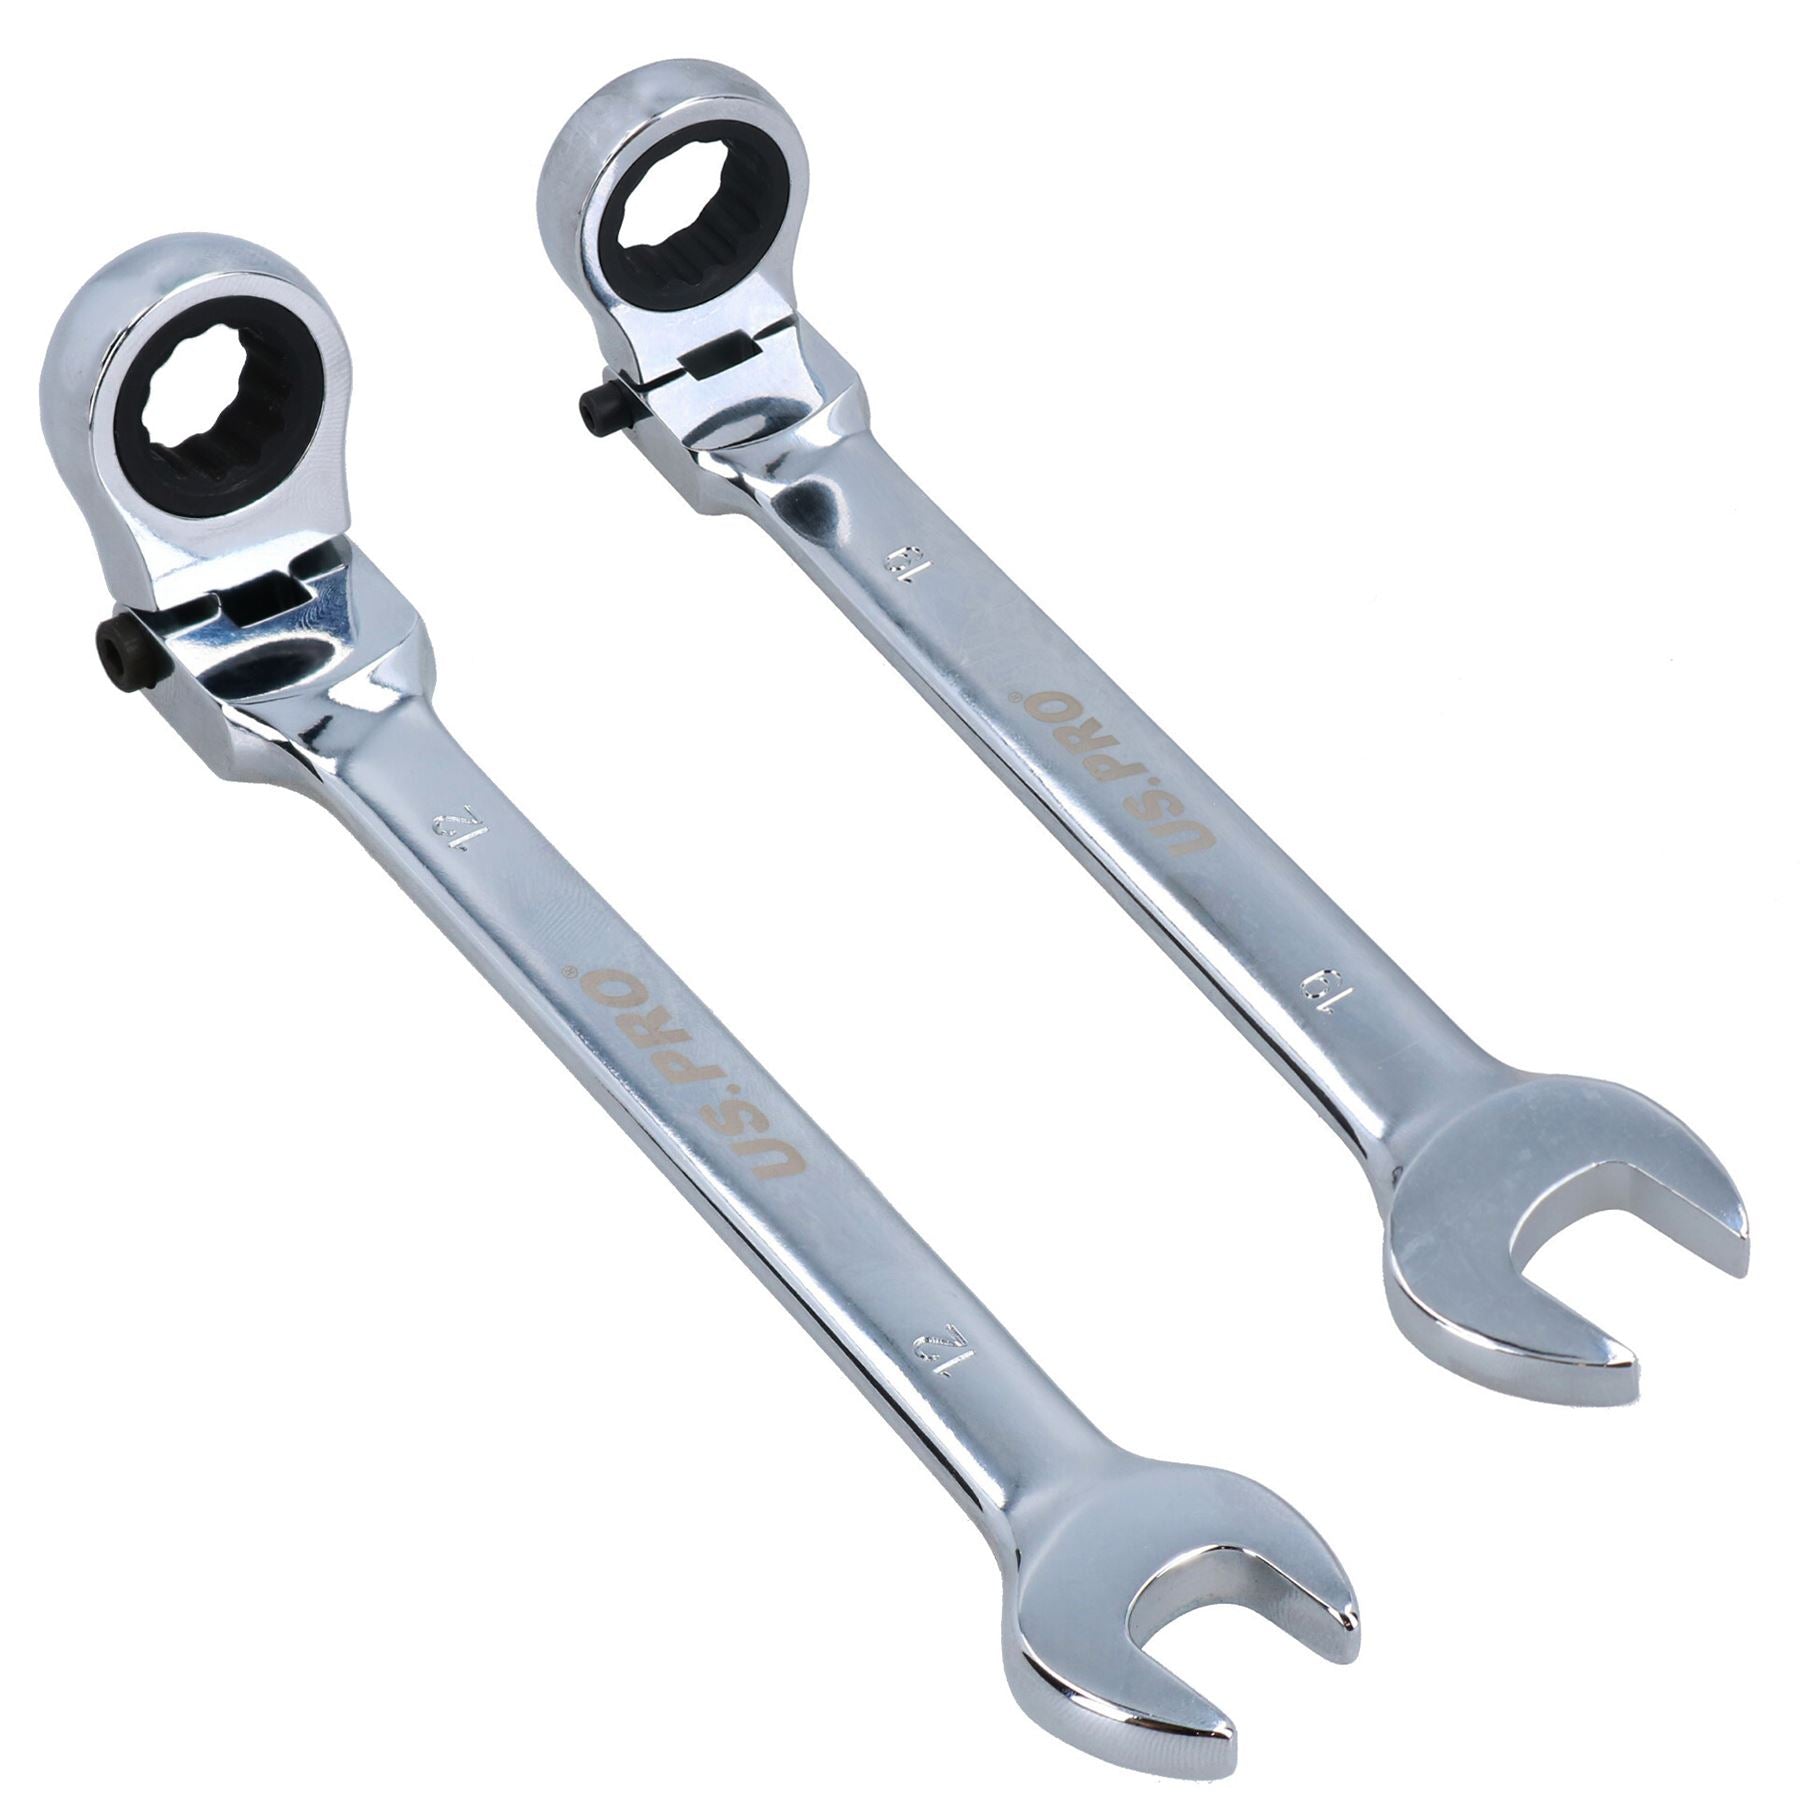 Flexible Headed Ratchet Combination Spanner Wrench with Integrated Lock